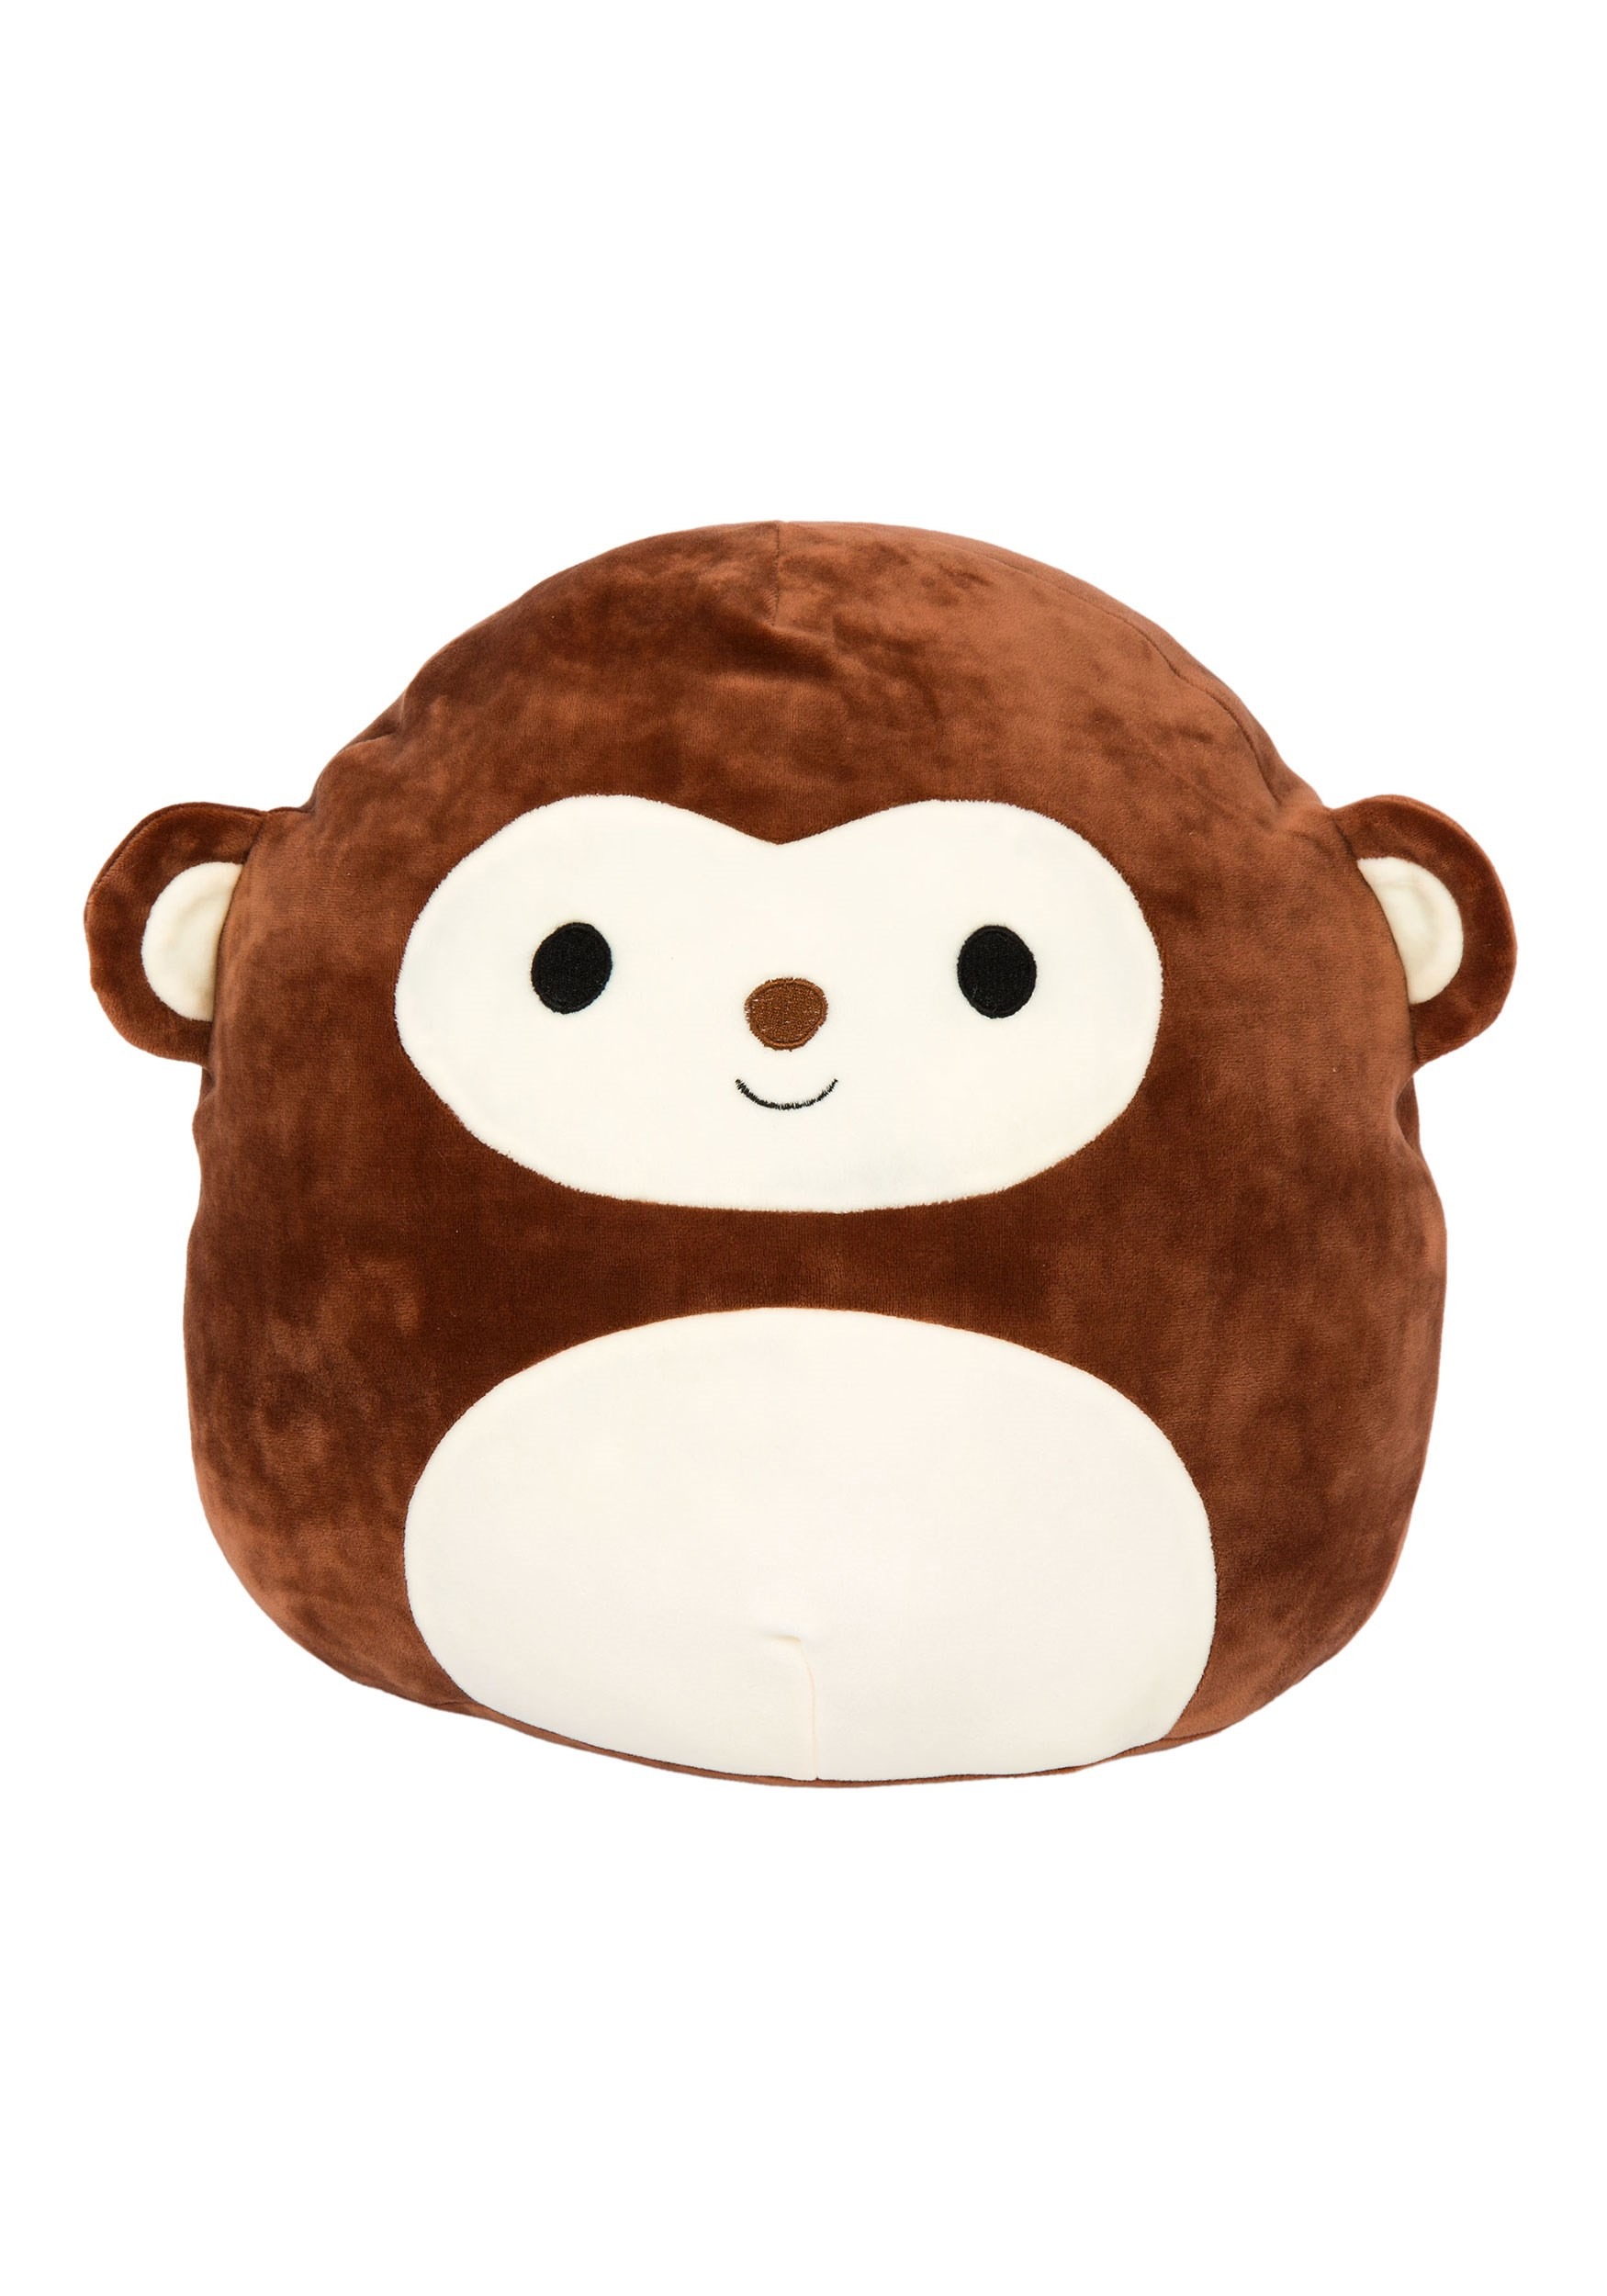 Squishmallow  12" Milly The Monkey Stackable  Plush Soft Pillows New Tags 